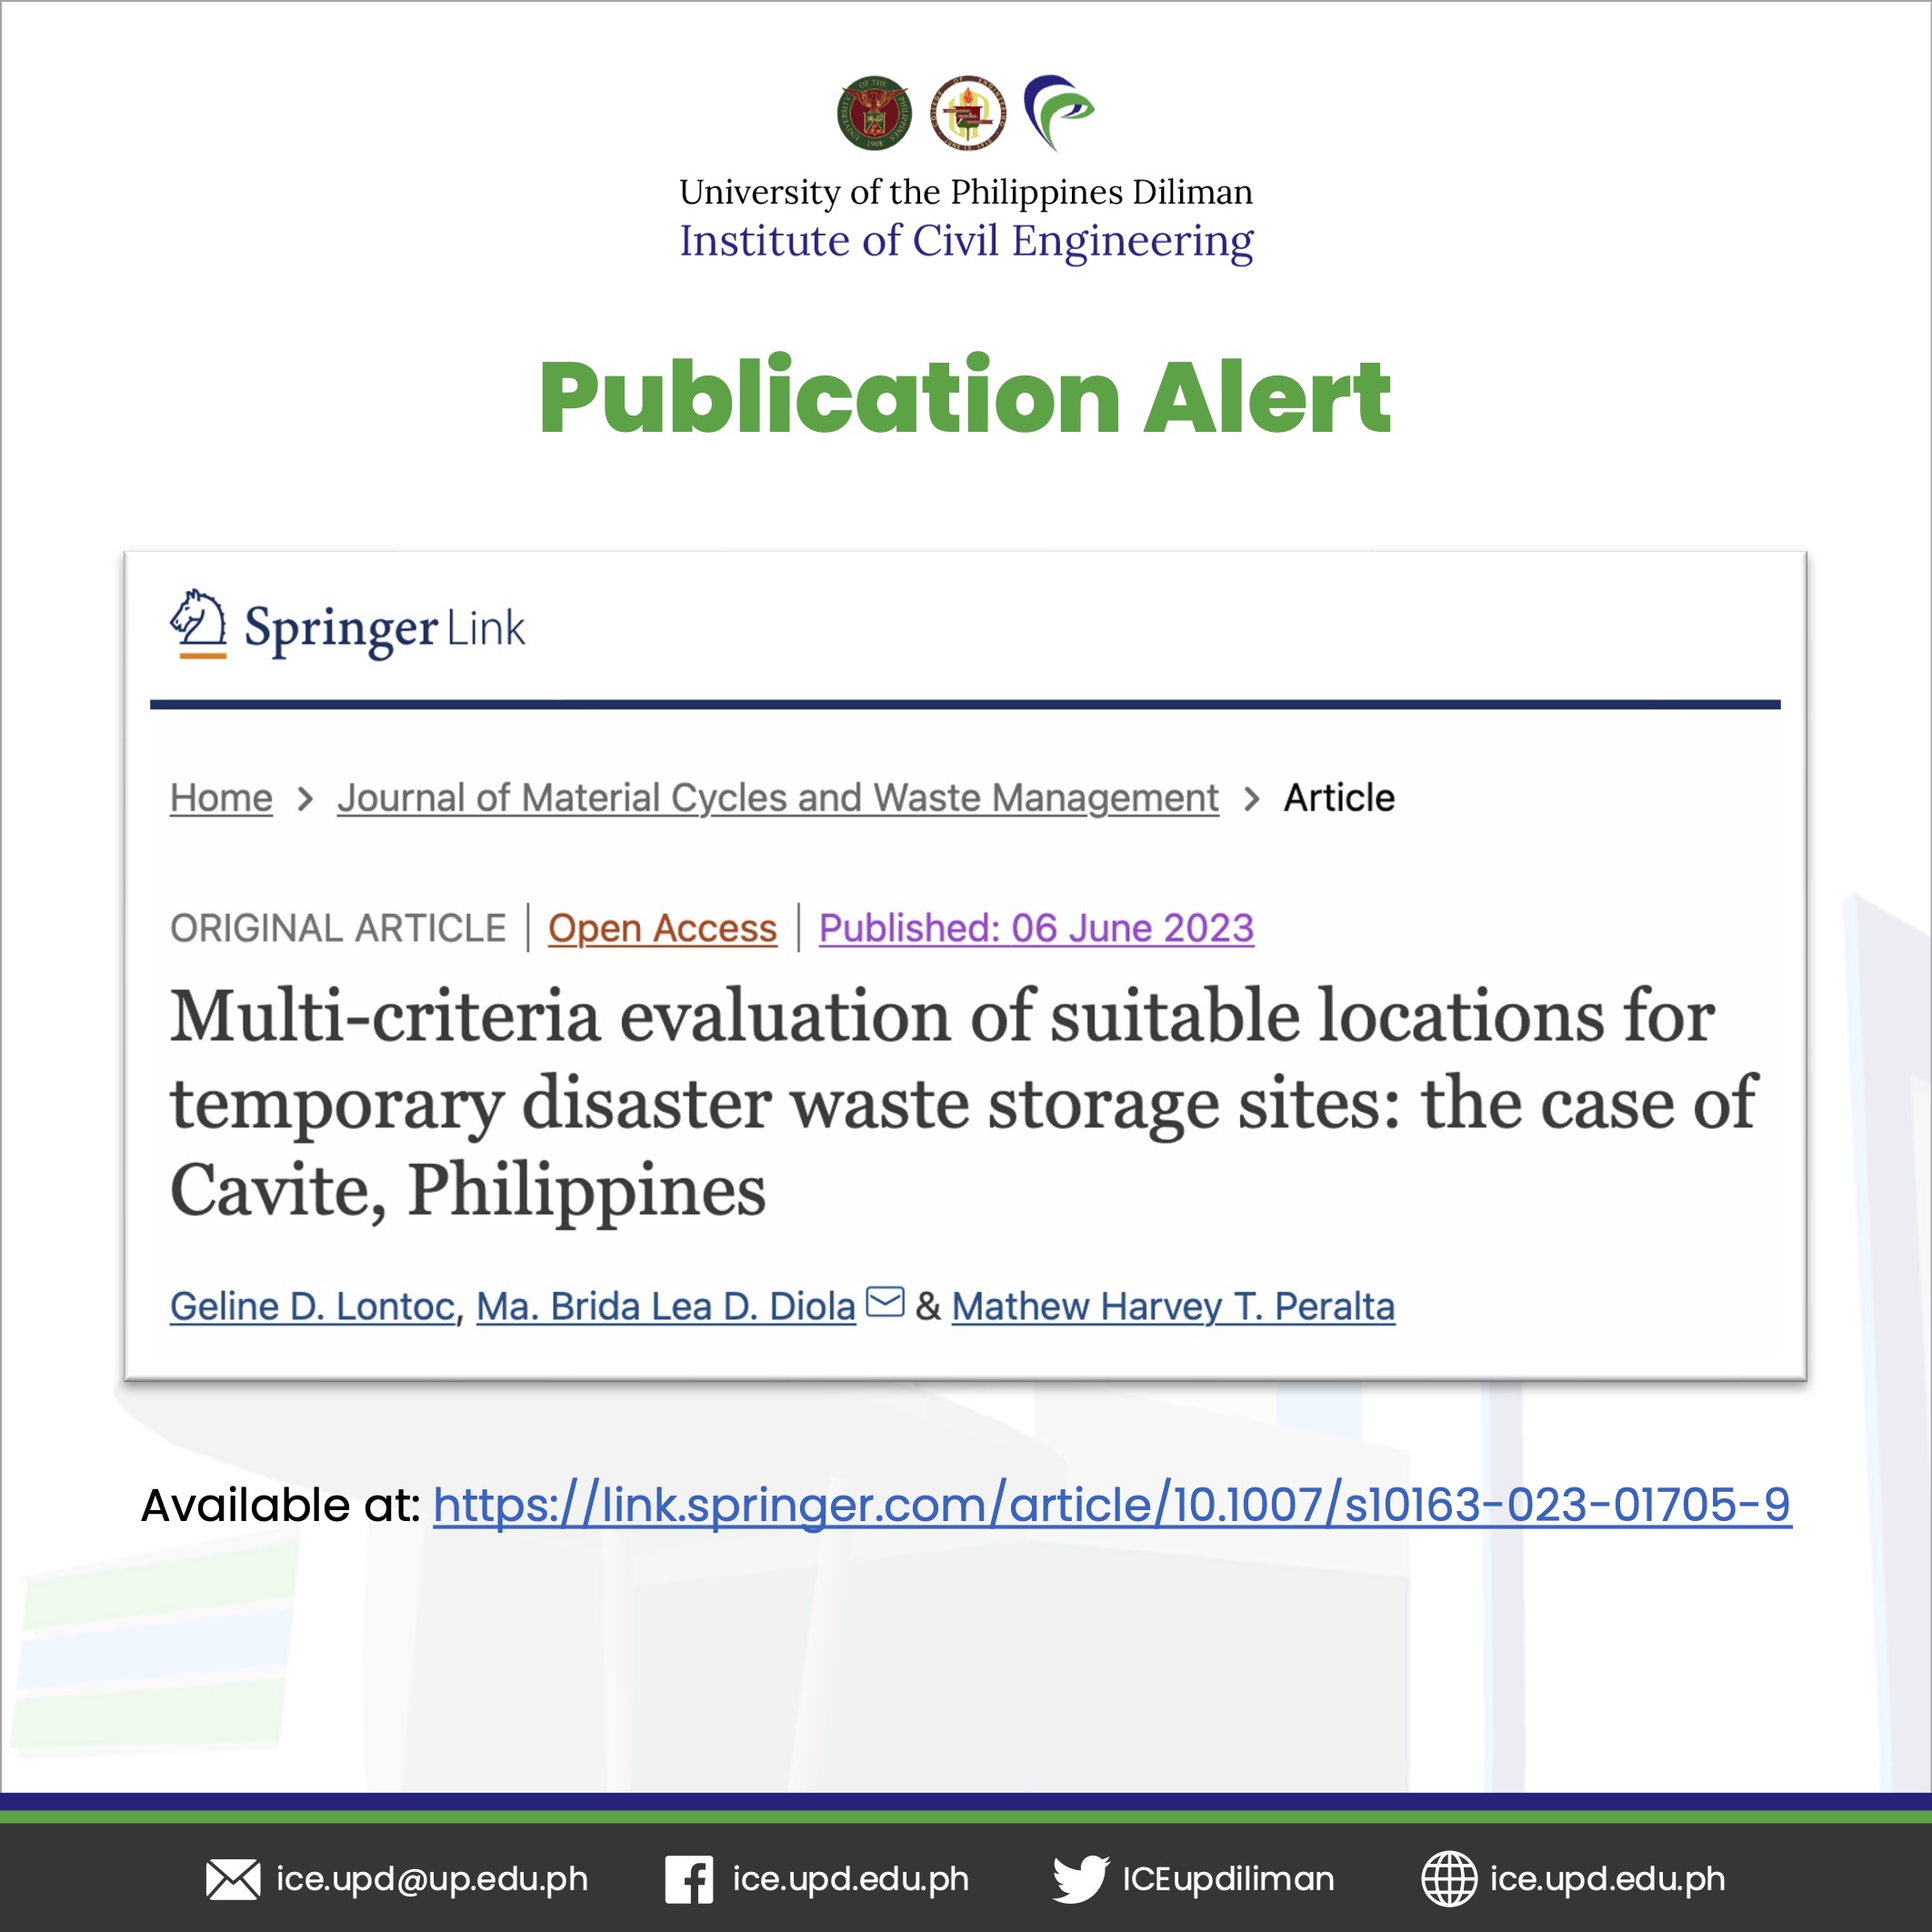 Publication Alert: Multi-criteria evaluation of suitable locations for temporary disaster waste storage sites: the case of Cavite, Philippines